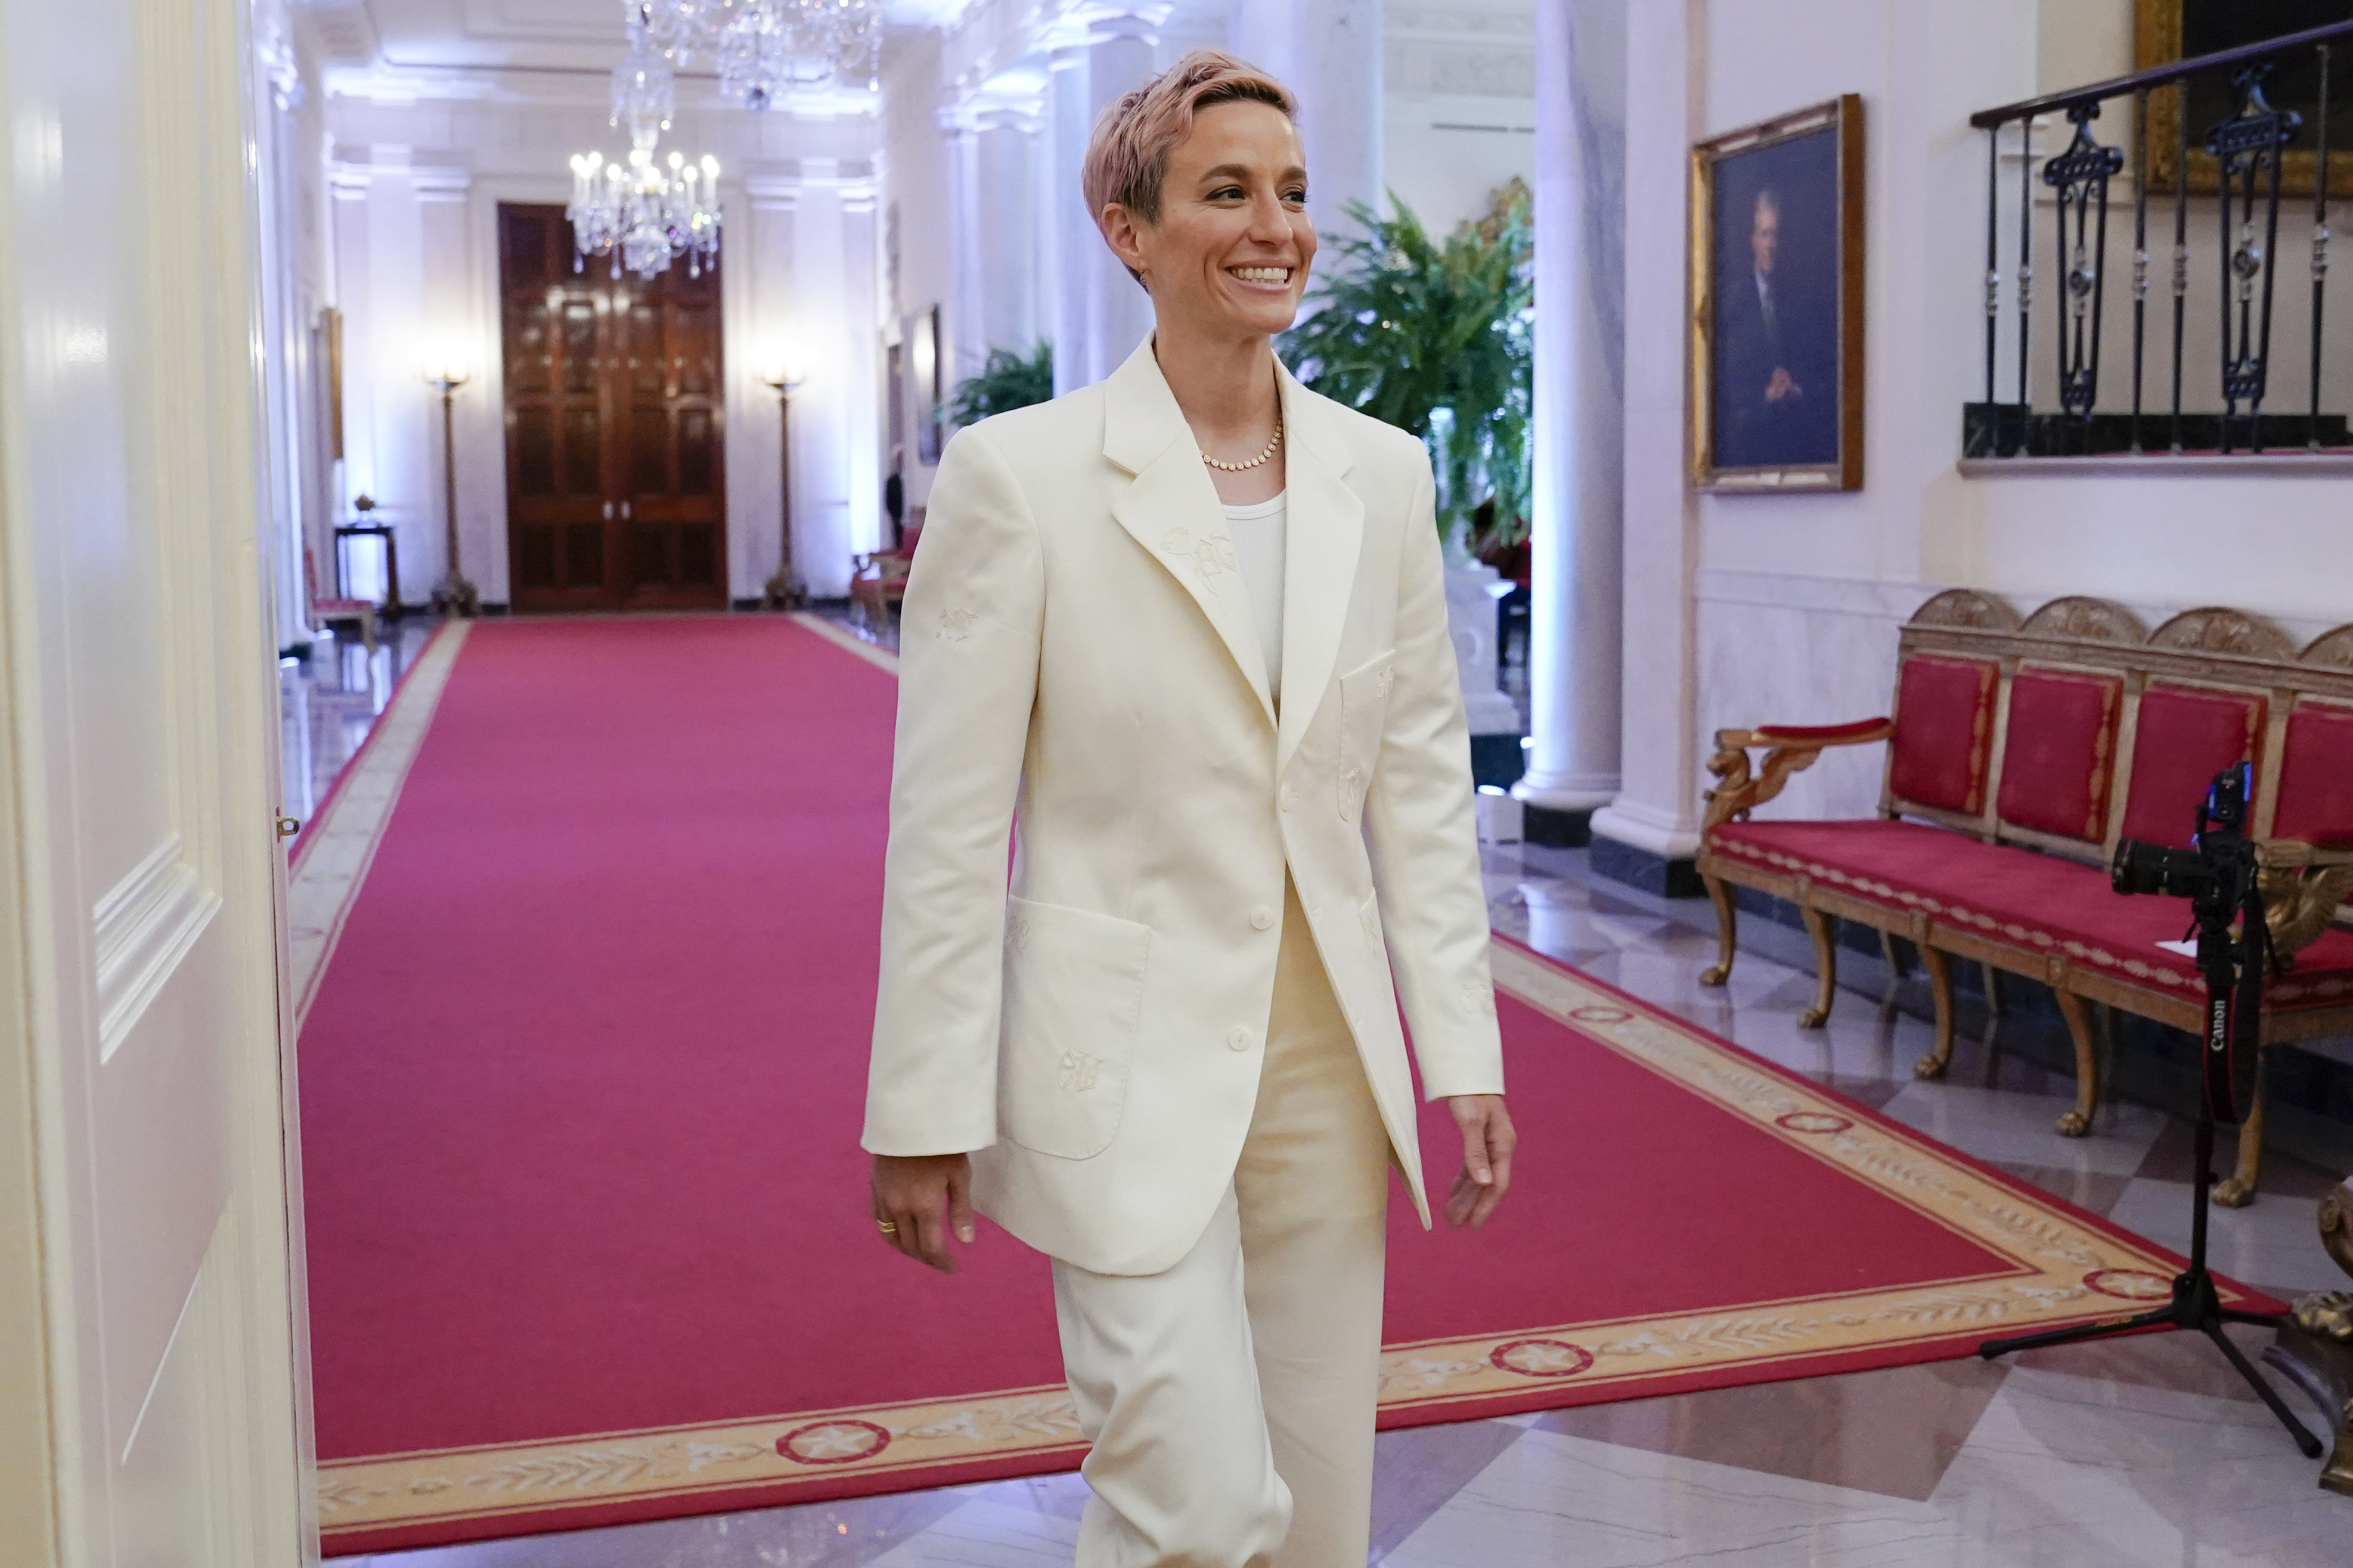 Soccer star and Olympic gold medalist Megan Rapinoe arrives to attend a ceremony to award the nation's highest civilian honor, the Presidential Medal of Freedom, in the East Room of the White House in Washington, on July 7, 2022. 